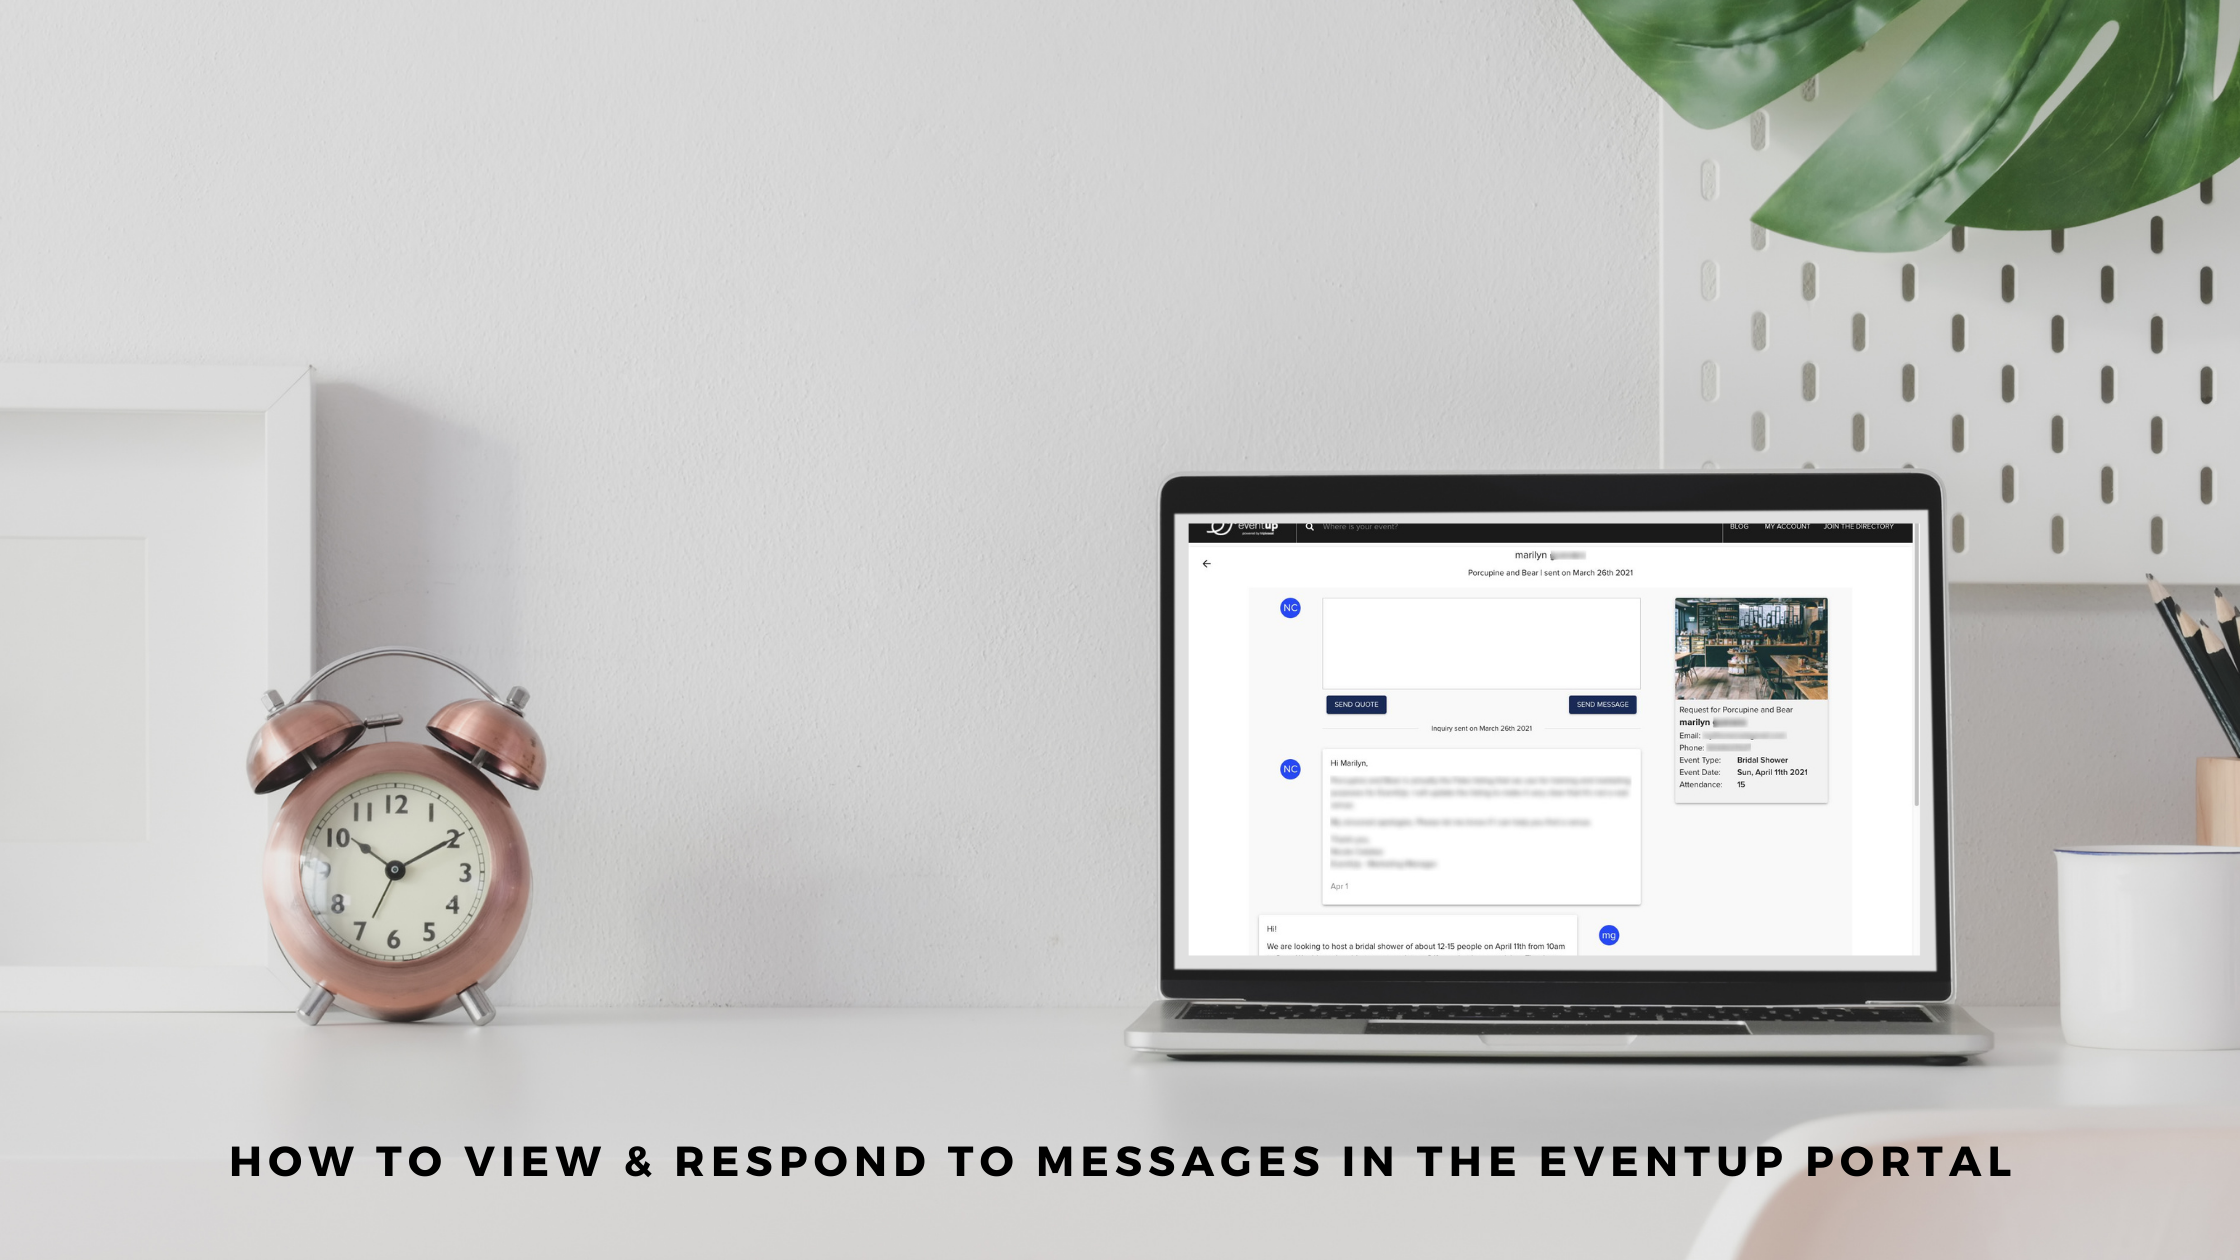 How To View & Respond To Messages In The EventUp Portal